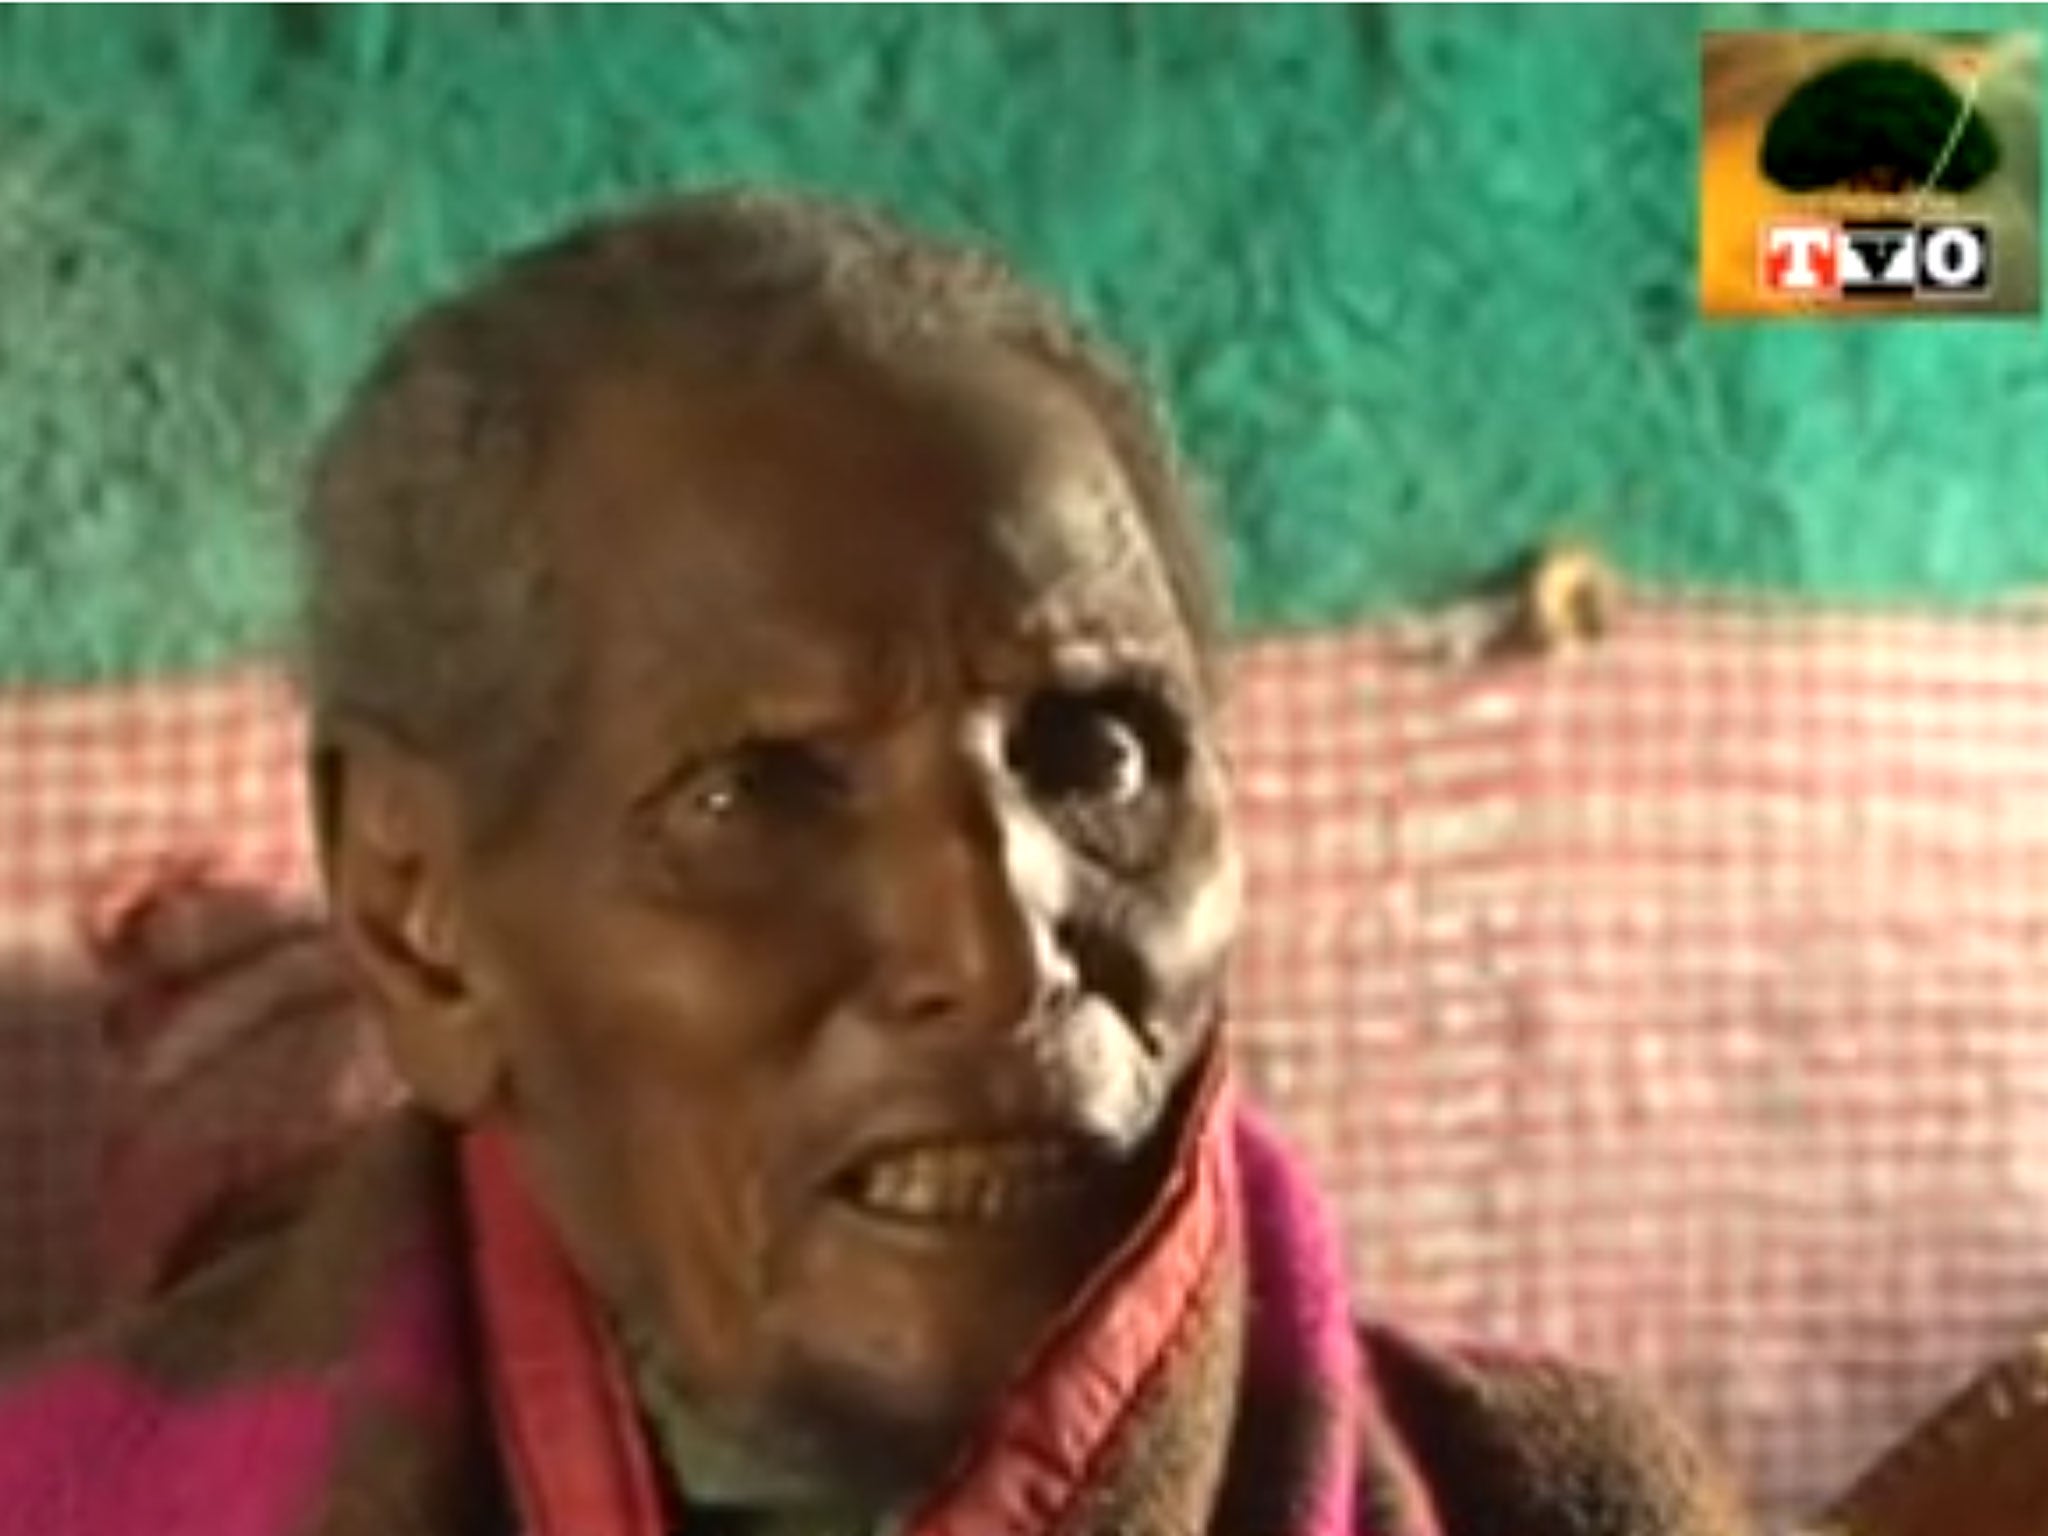 Dhaqabo Ebba, pictured here telling TV reporters his memories of events in the 19th Century, could be the oldest man ever to have lived at 160 years old